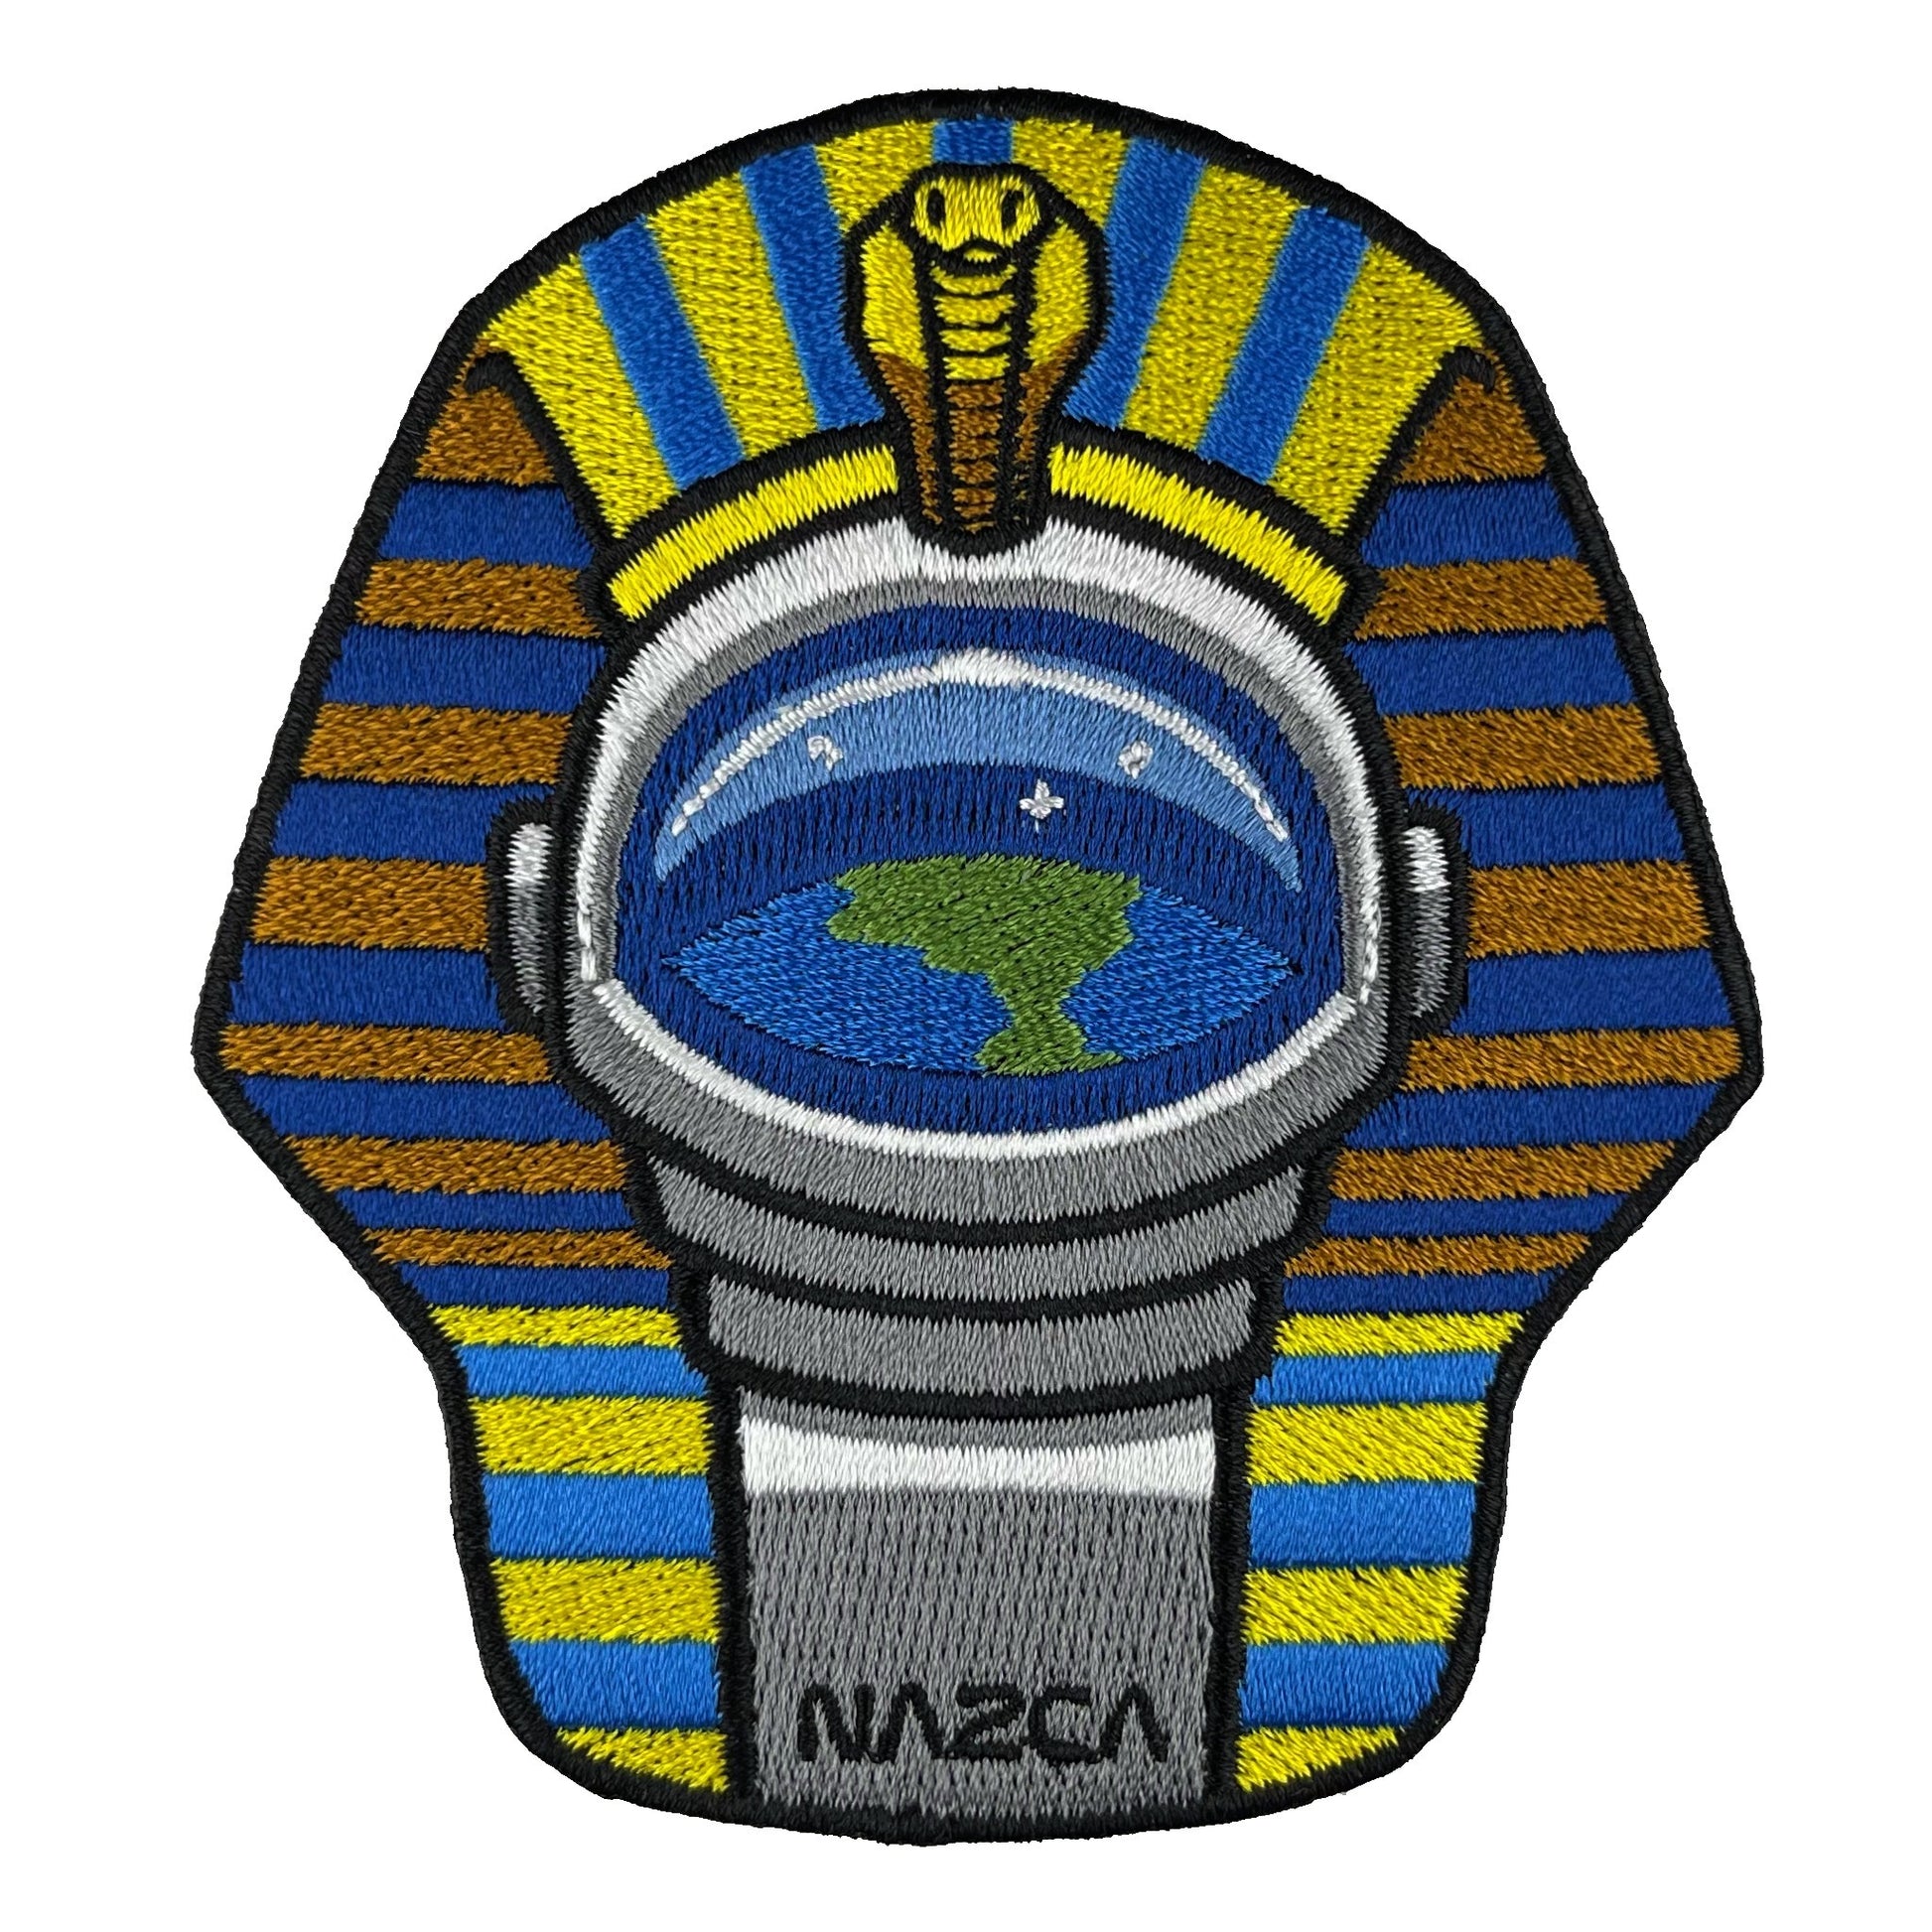 Nazca Ancient Astronaut Space Mission Patches Pharaoh Astronaut